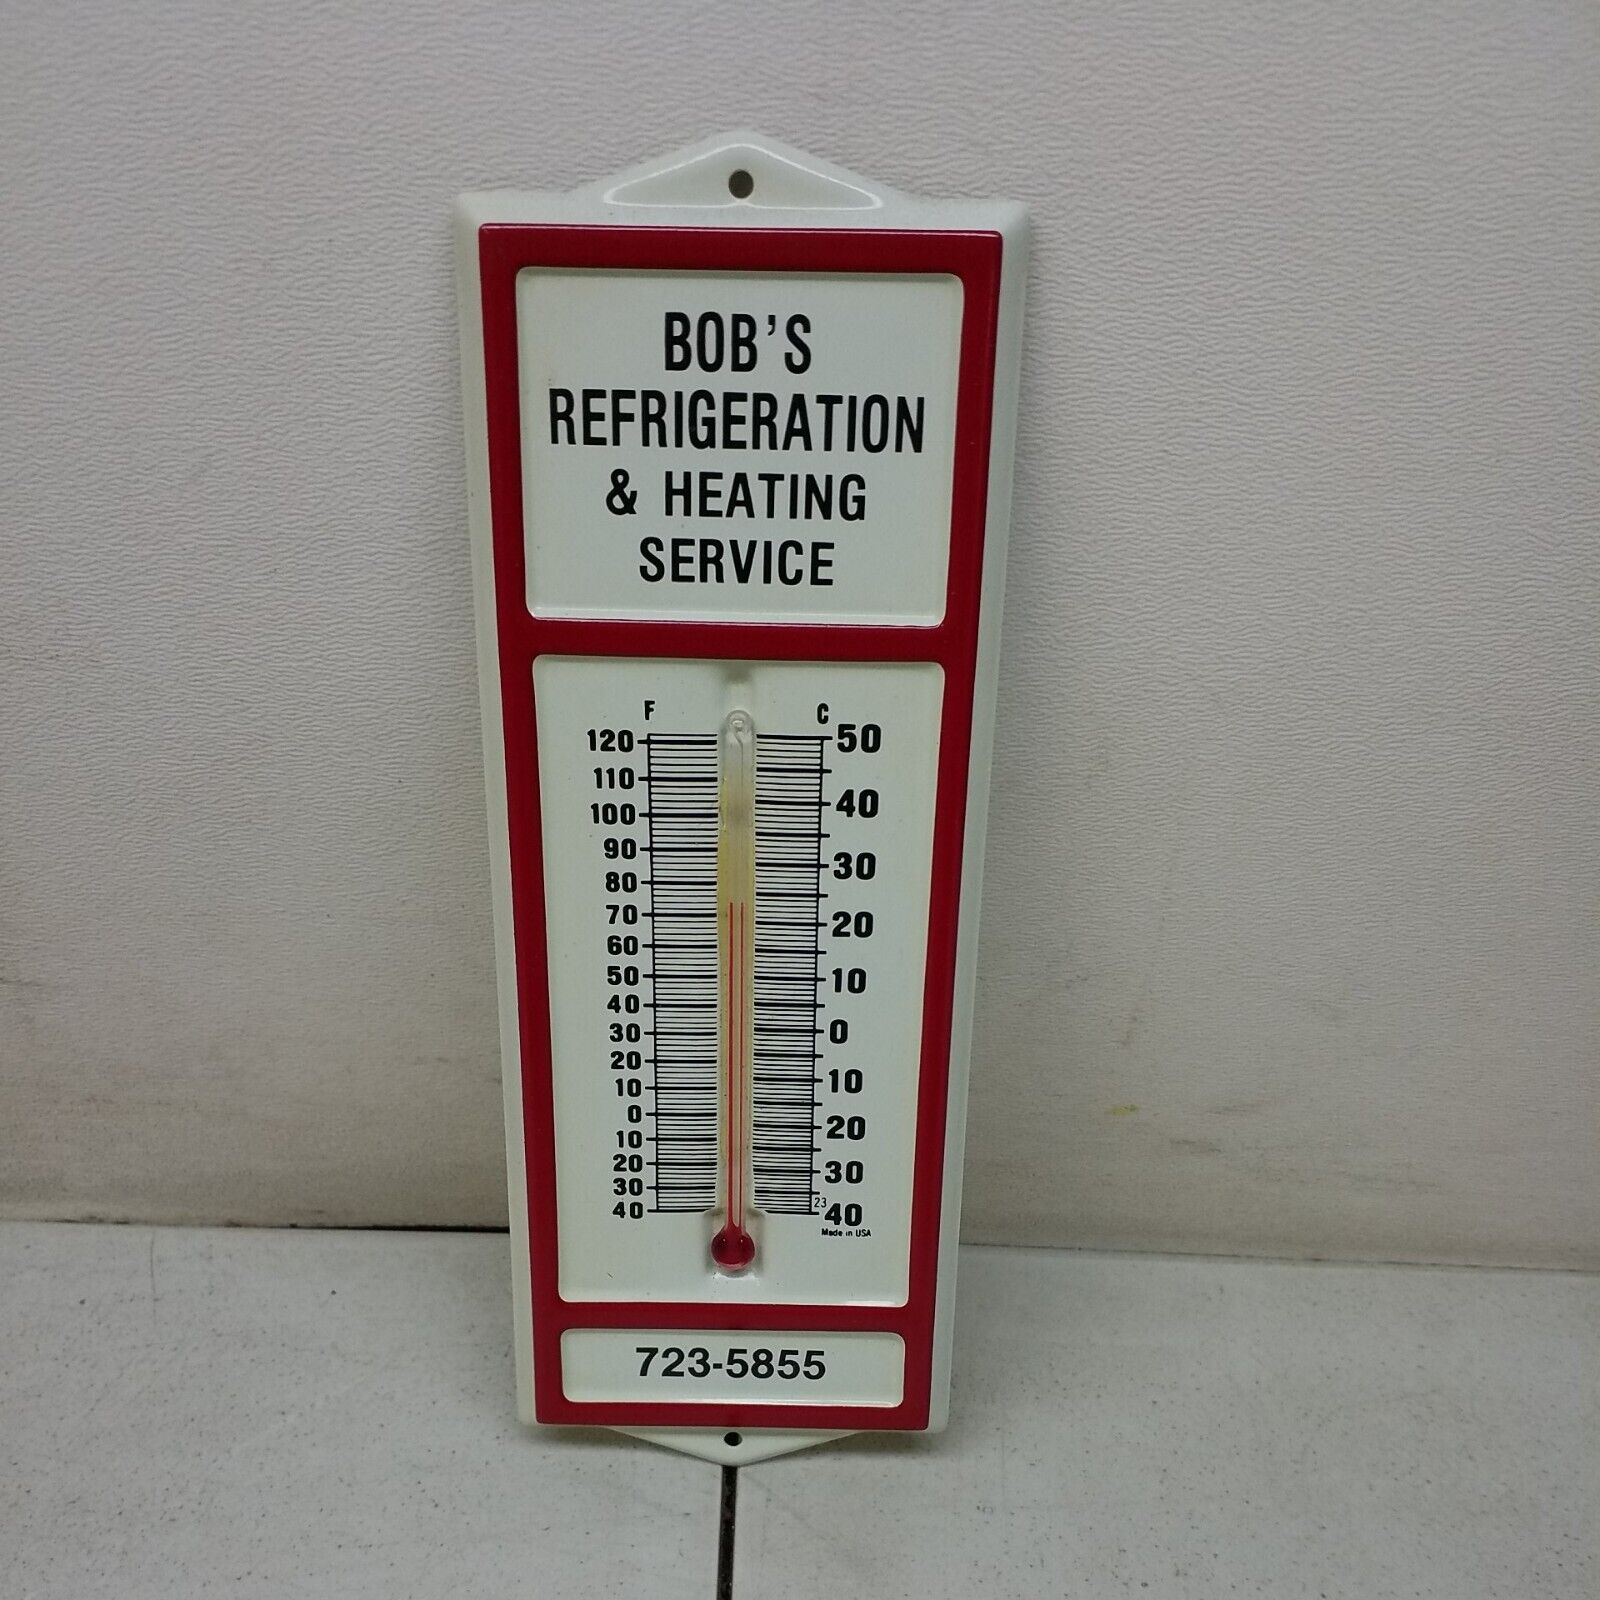 Bobs Refrigeration and Heating Service Thermometer from Chippewa Falls Wisconsin